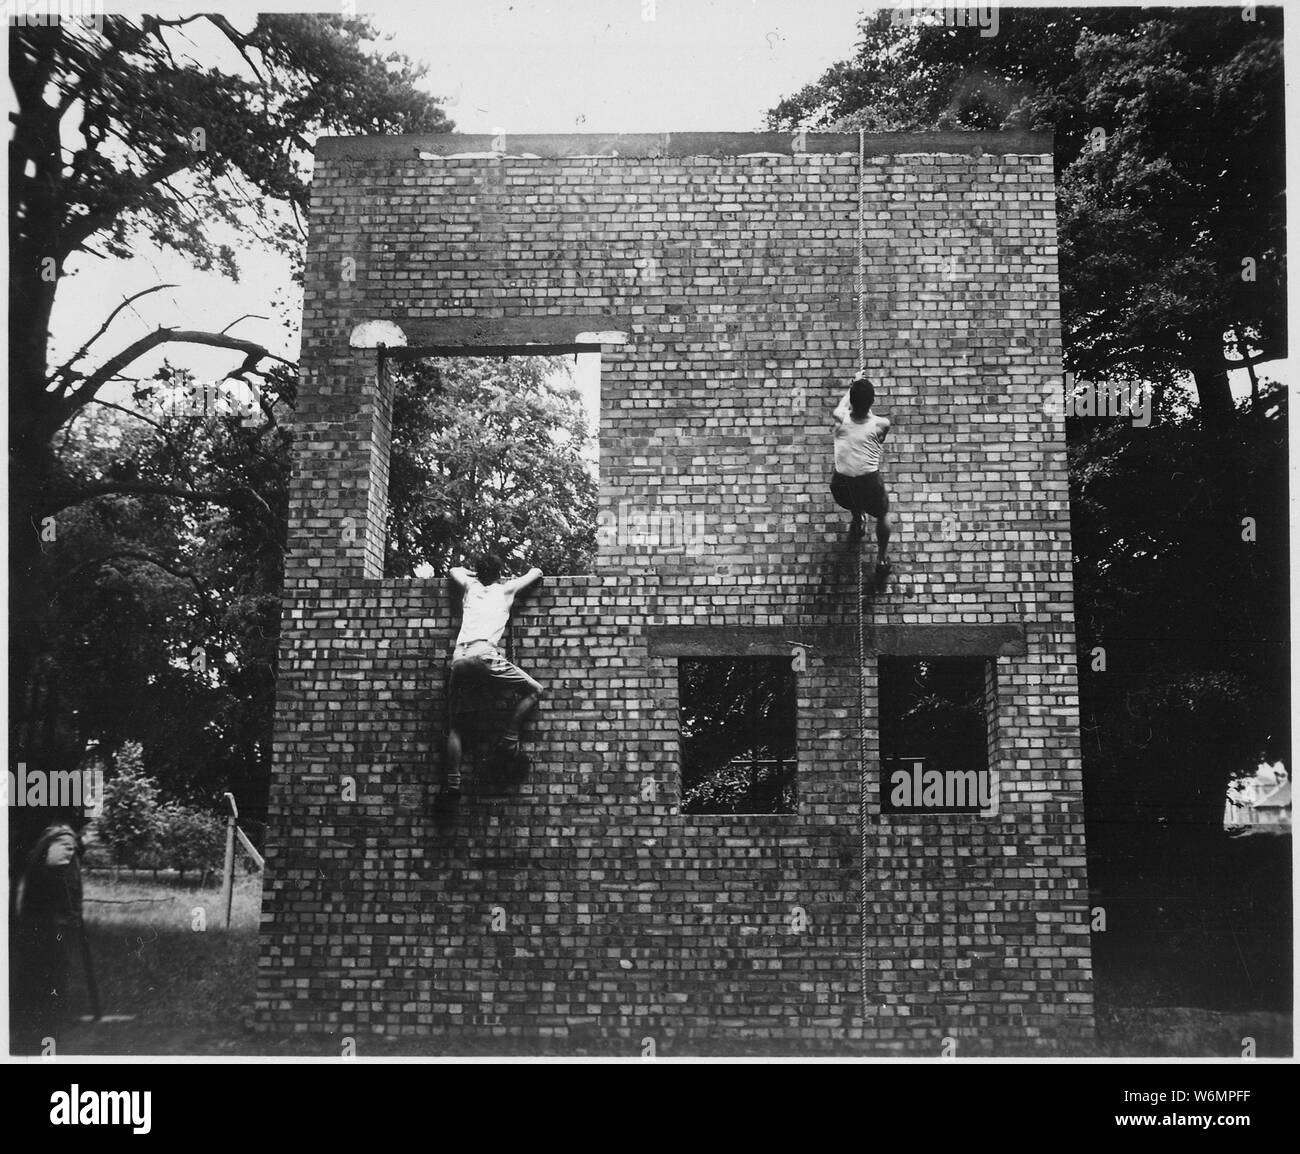 Two Jeds scale brick wall in training exercises. Milton Hall, England, circa 1944., 1943 - 1944; General notes:  Use War and Conflict Number 736 when ordering a reproduction or requesting information about this image. Stock Photo